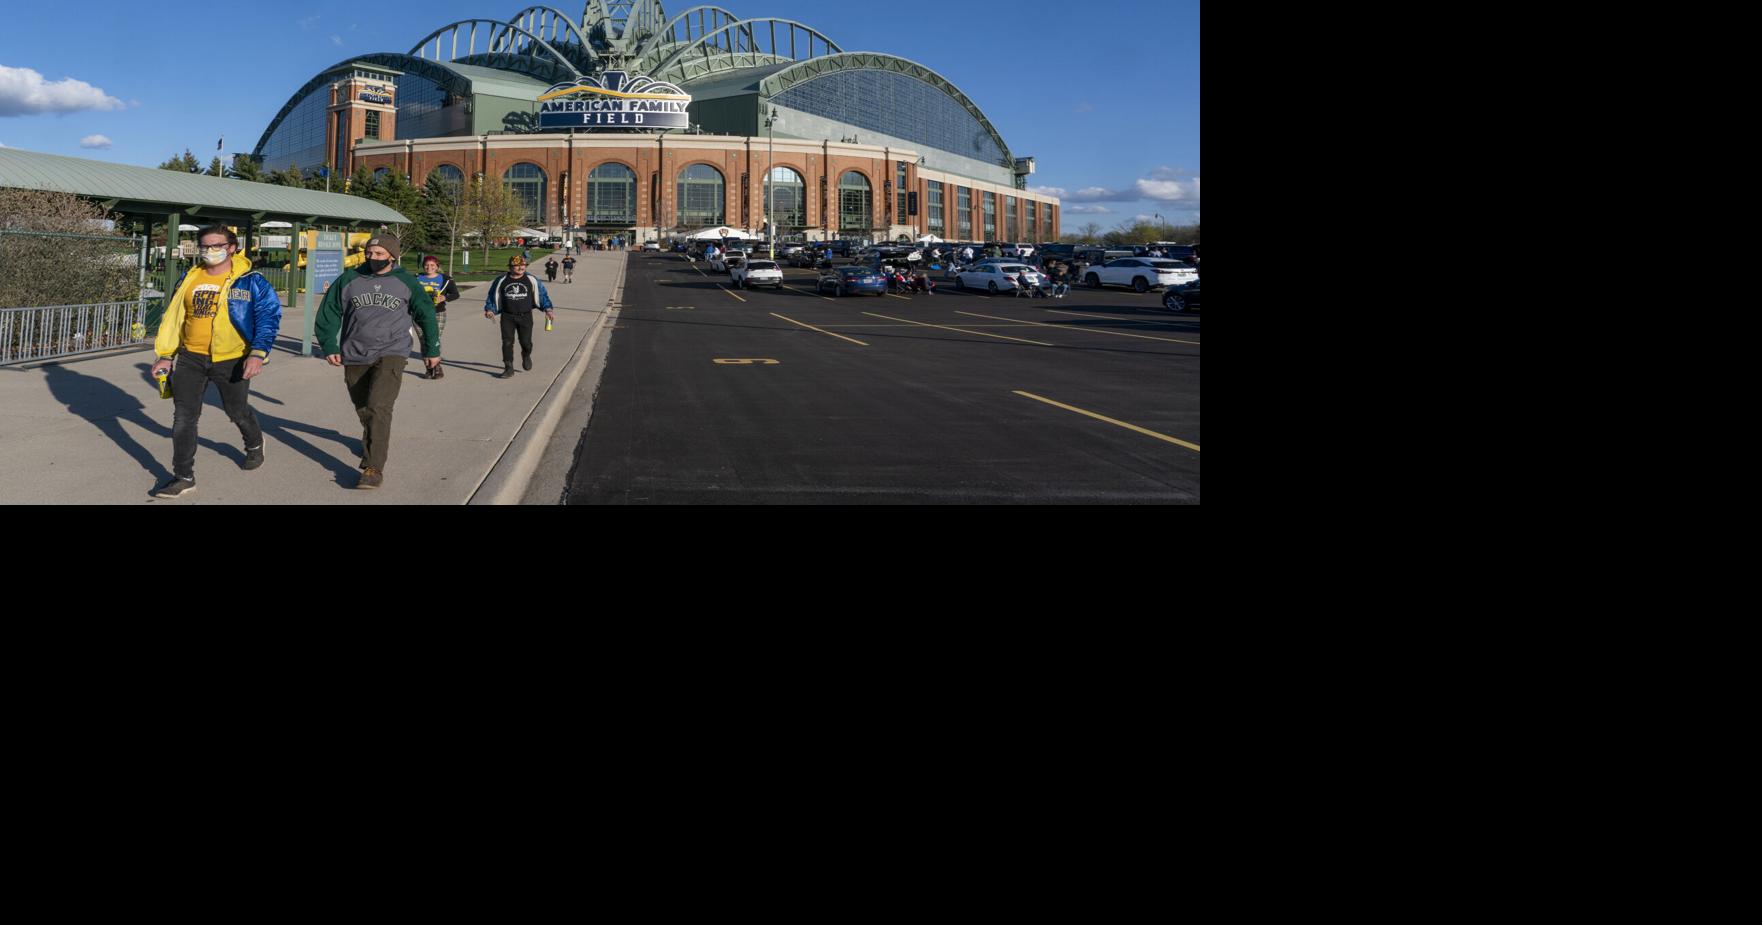 American Family Field - Tips for Your Trip to the Home of the Milwaukee  Brewers - That Was A First